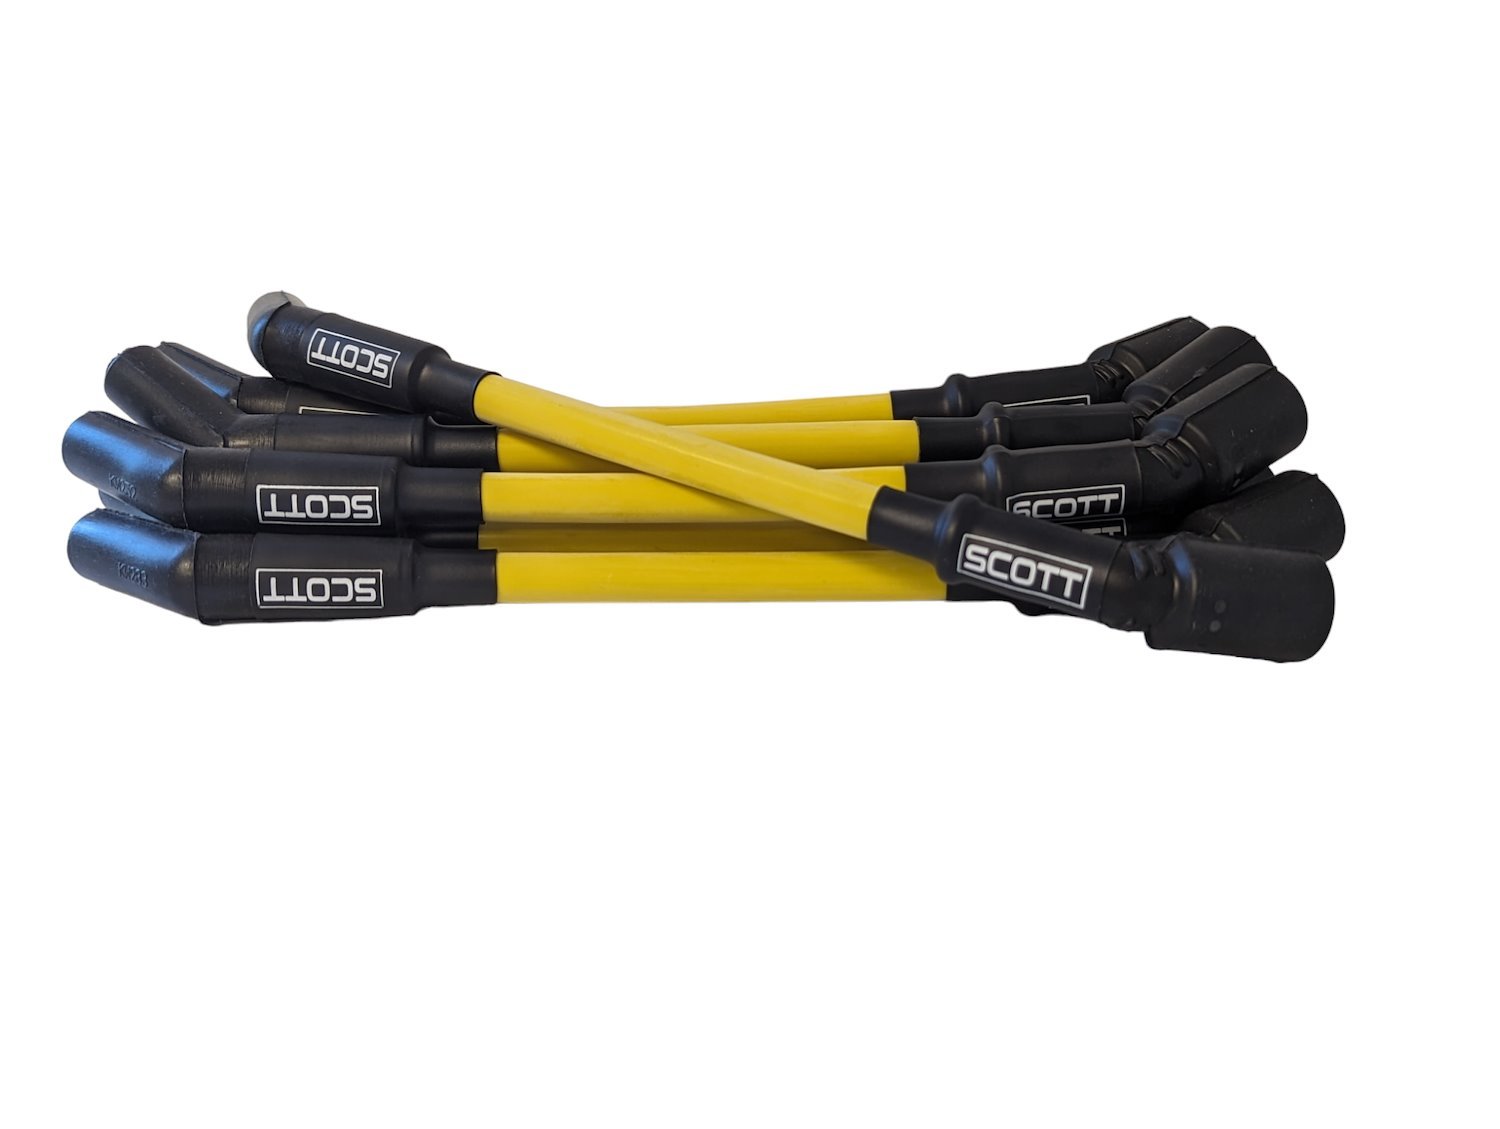 SPW-CH-LT-GEN5-7 High-Performance Silicone-Sleeved Spark Plug Wire Set for GM LS/LT (Gen5), [Yellow]